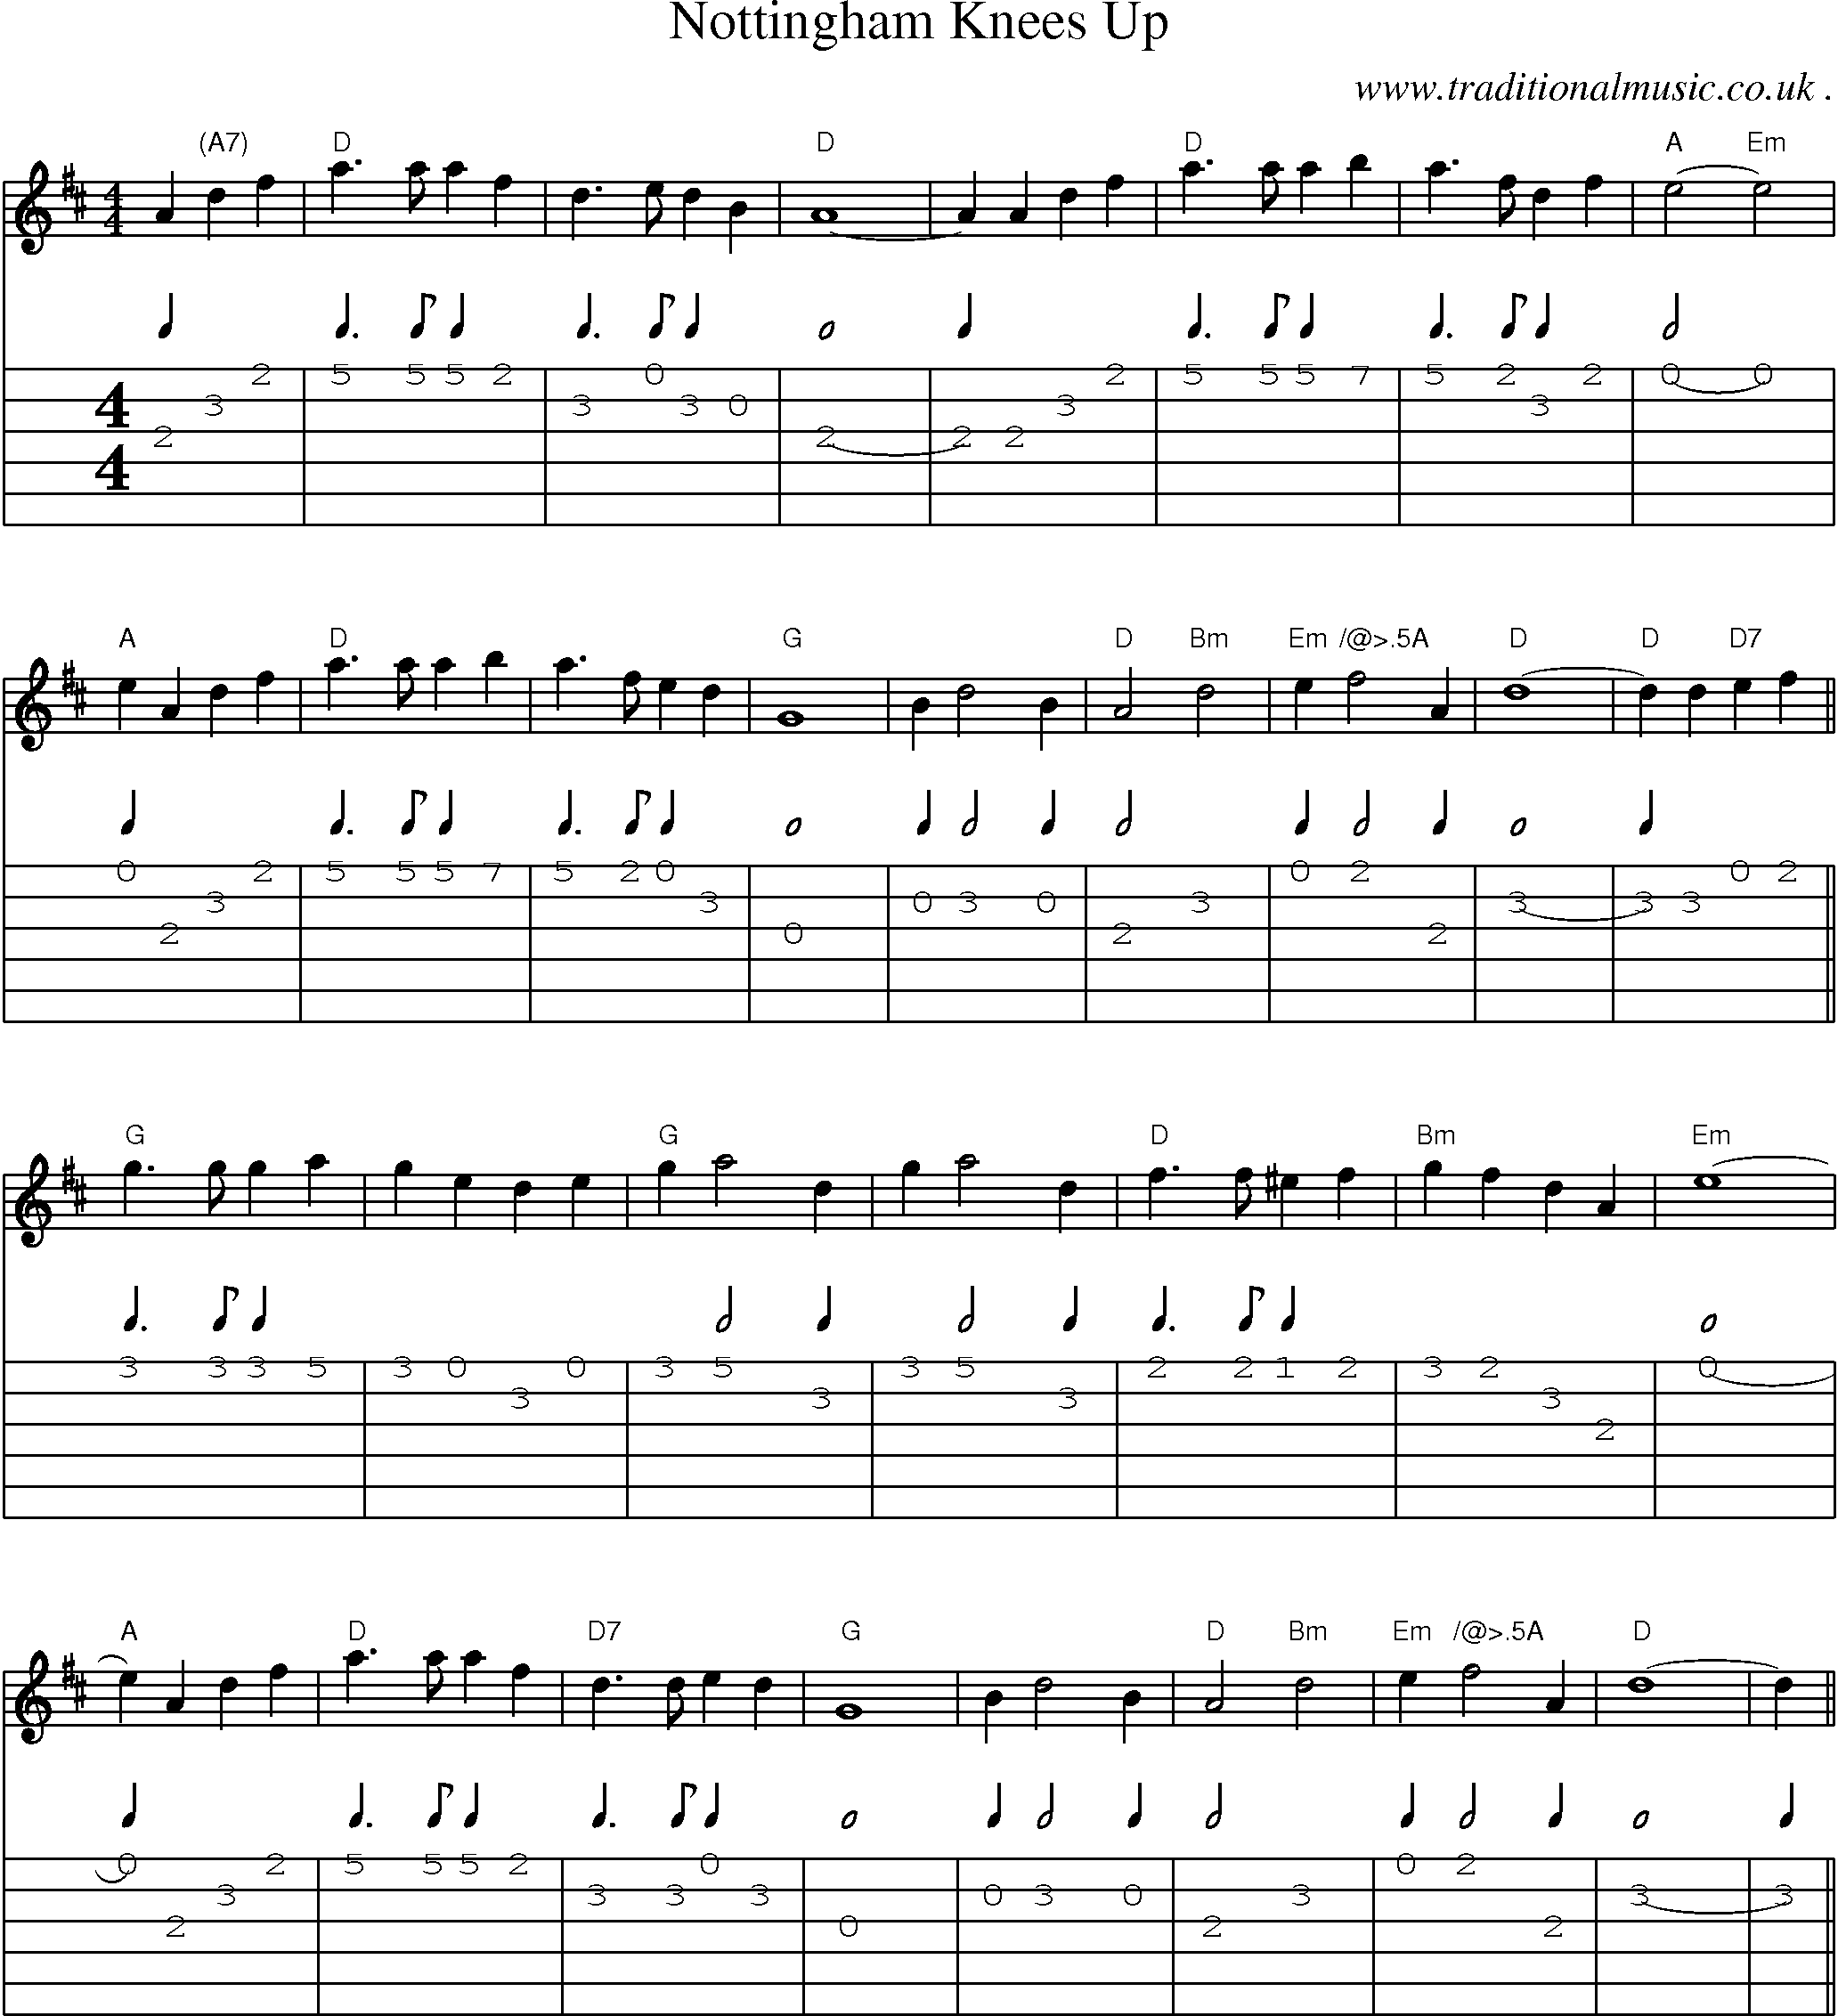 Sheet-Music and Guitar Tabs for Nottingham Knees Up